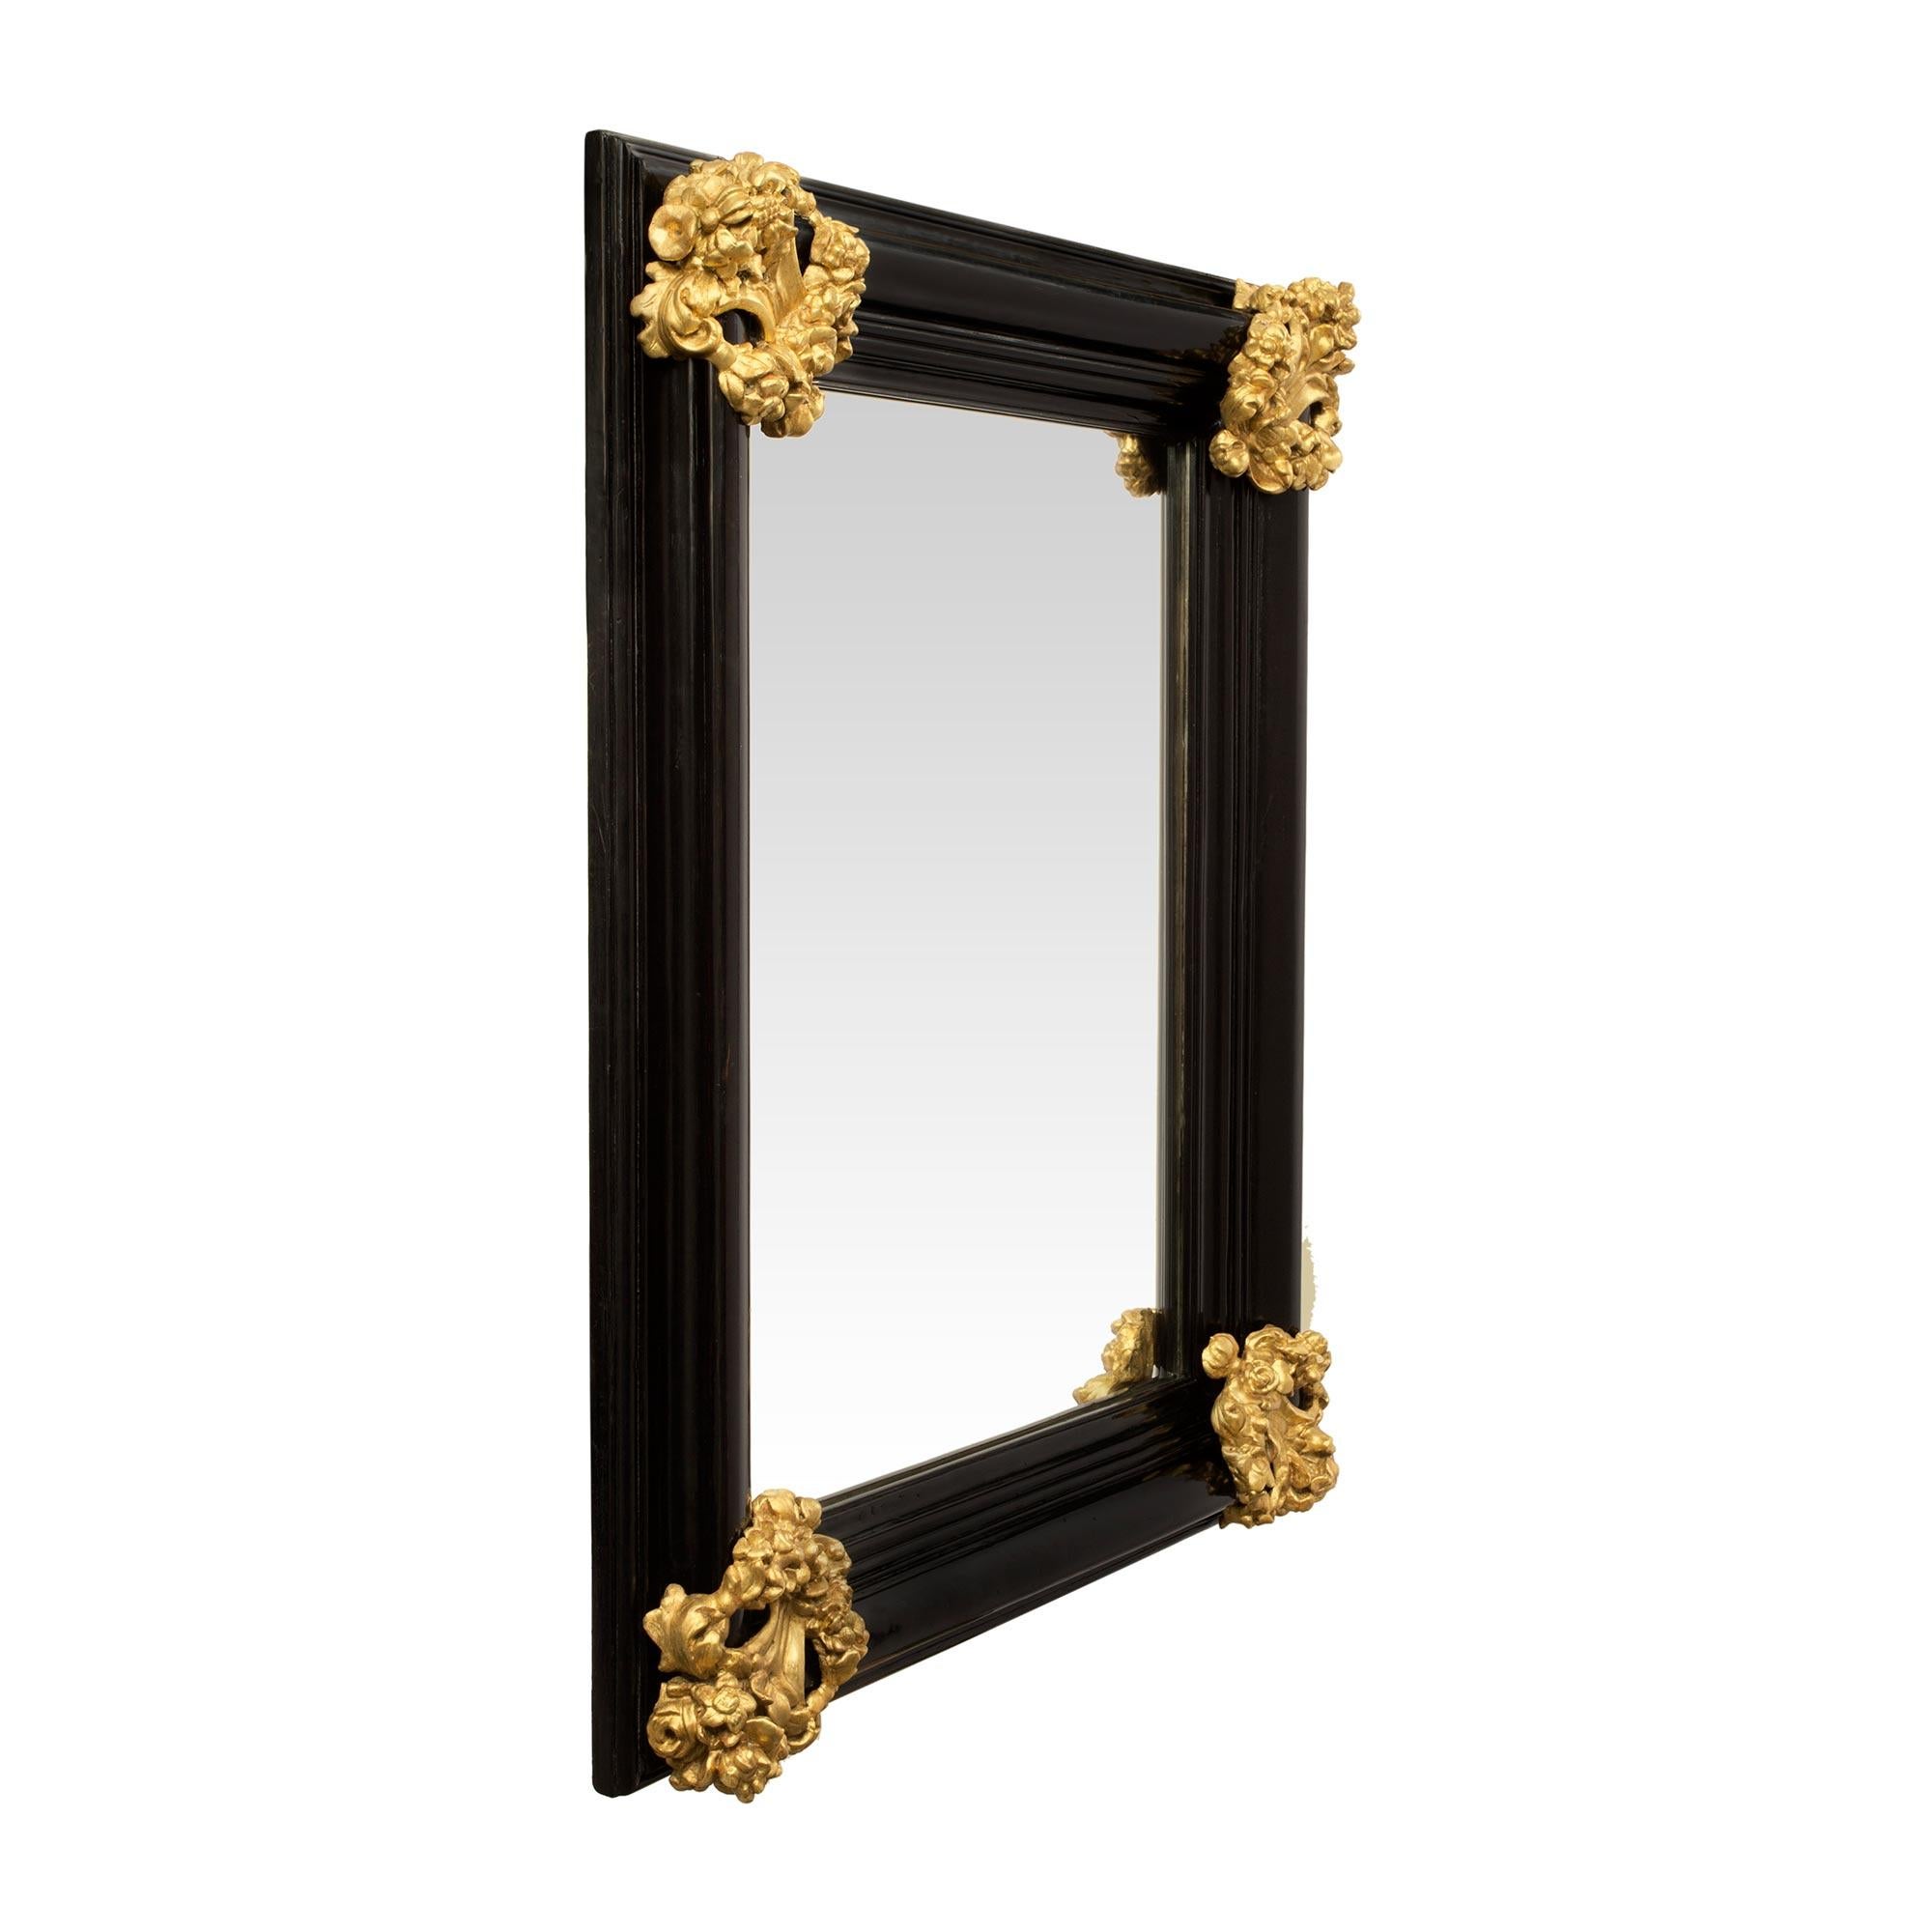 A most attractive Italian 18th century Baroque period Florentine rectangular mirror in ebony and giltwood. The ebony frame with a handsome mottled design has a very decorative and richly carved giltwood reserve at each corner. The pierced reserves